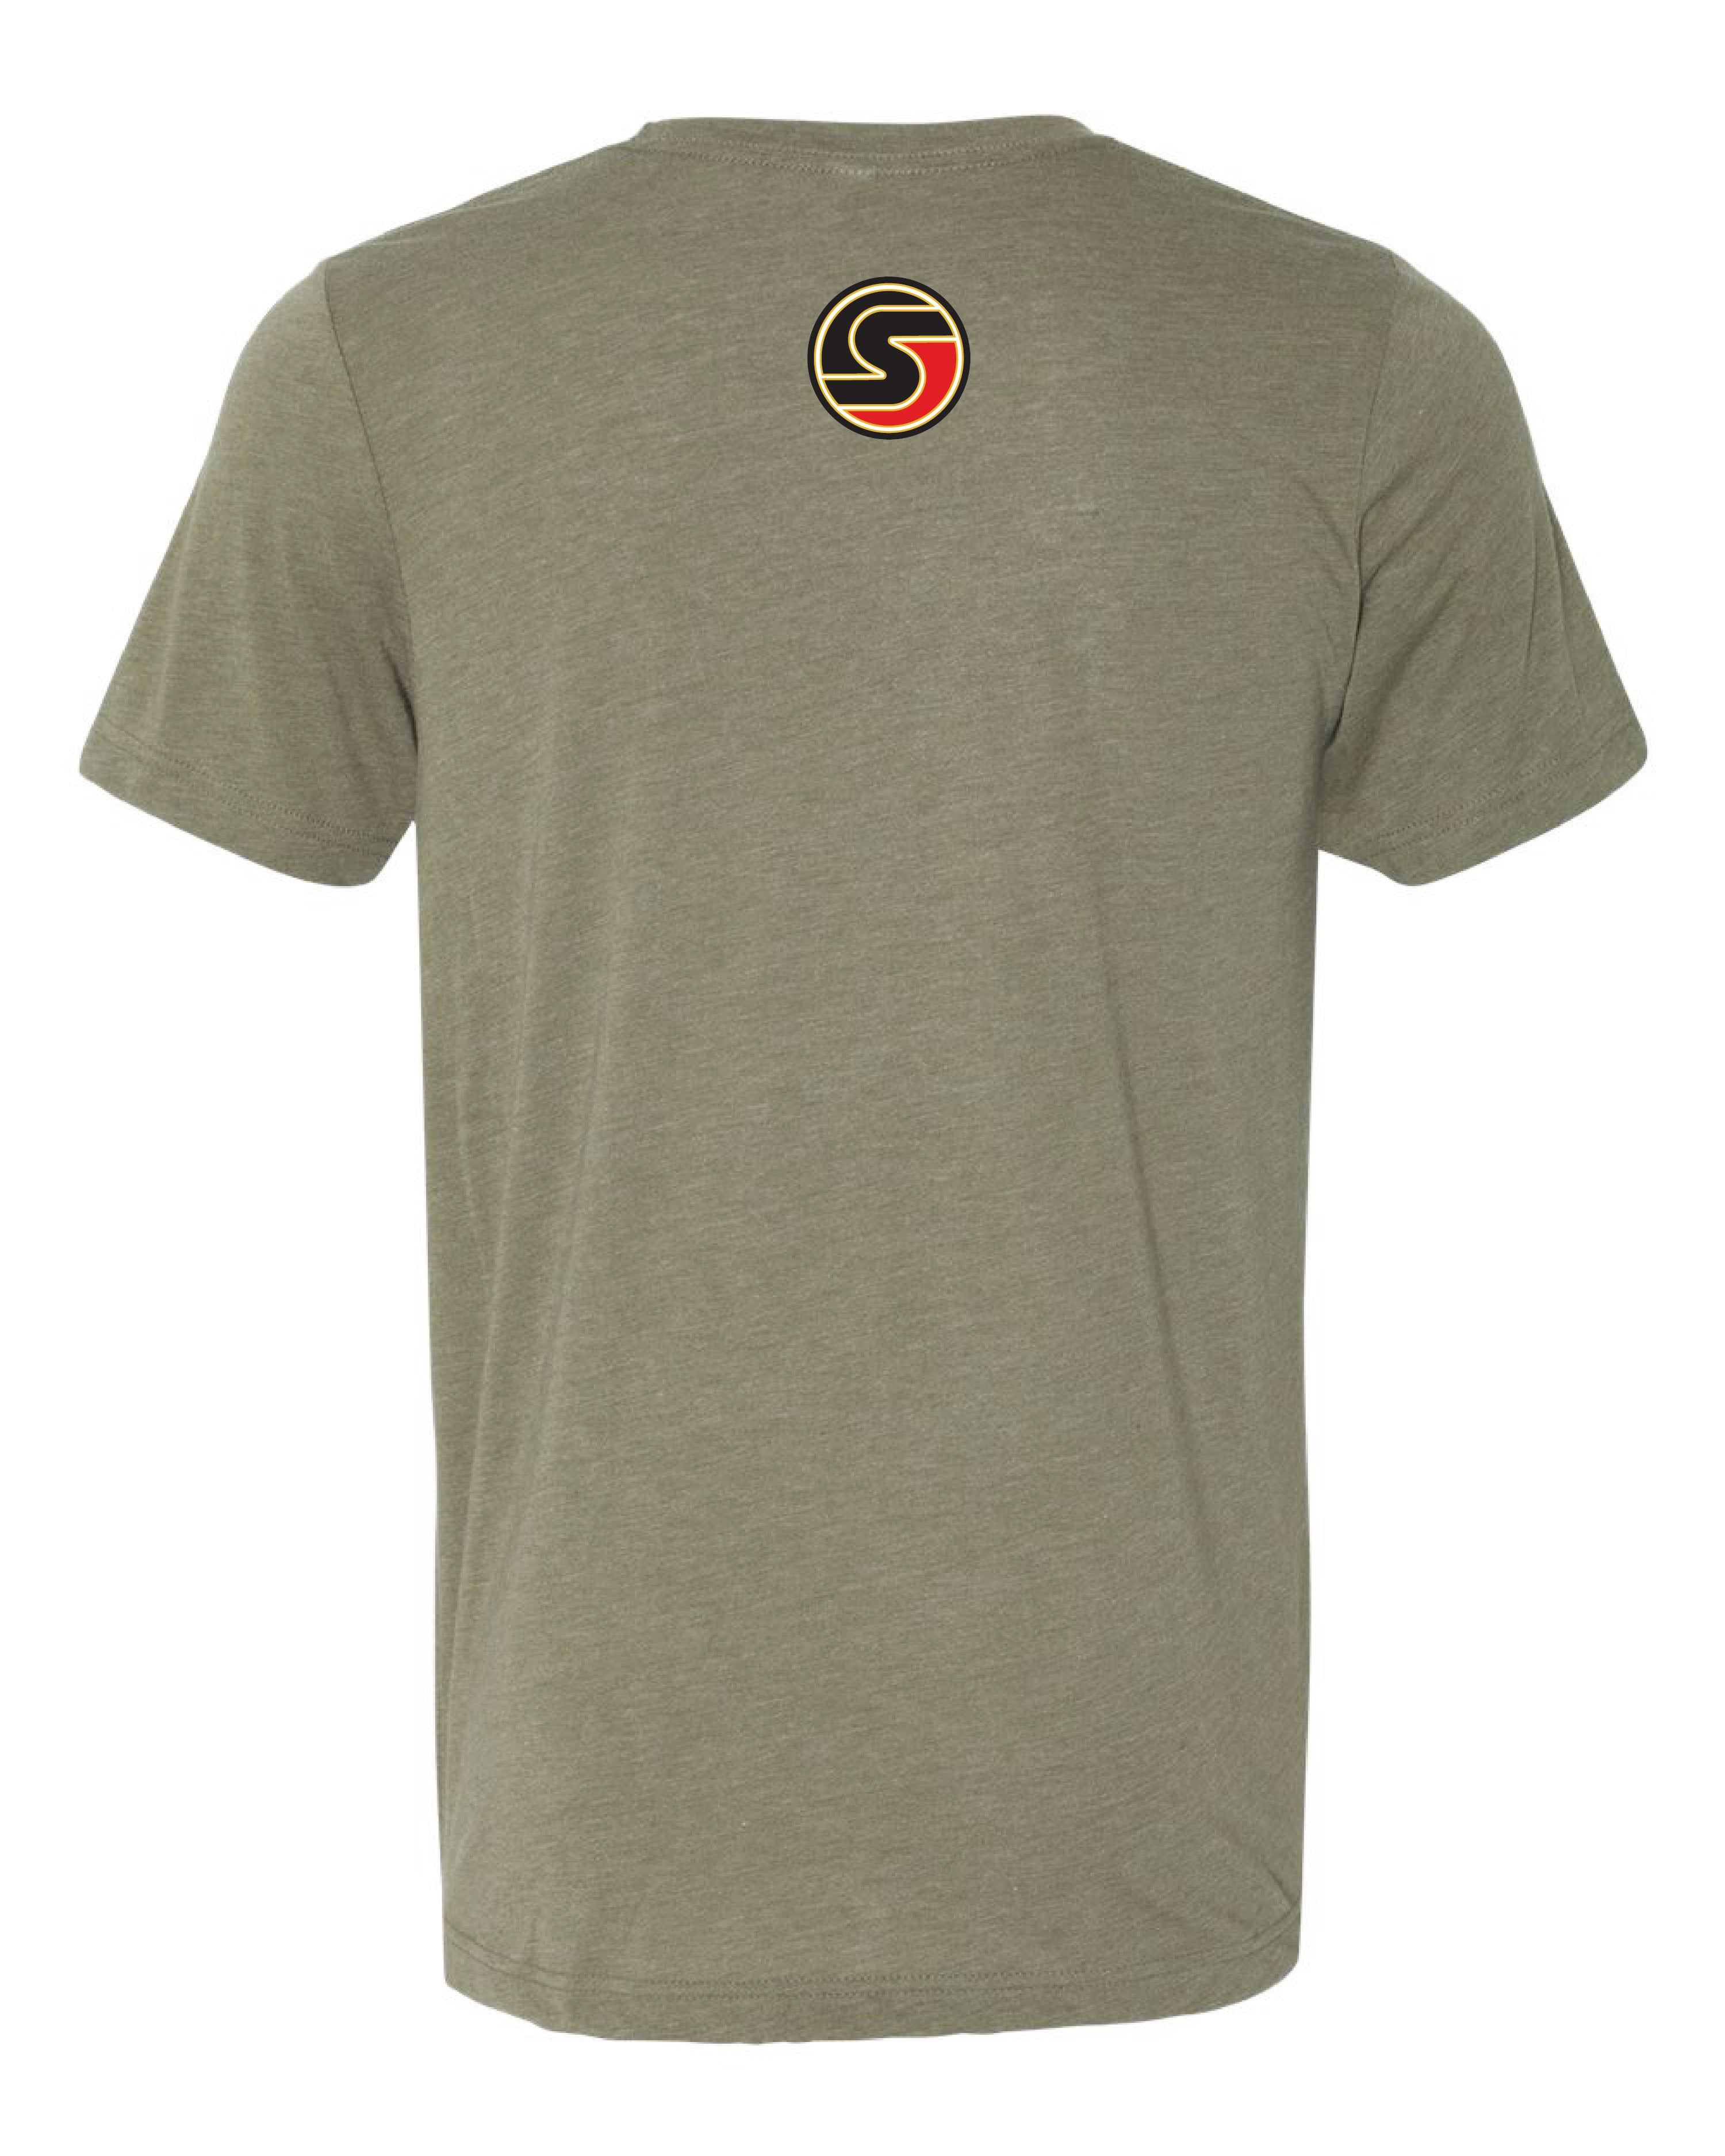 The Dominator Tee in Heathered Olive